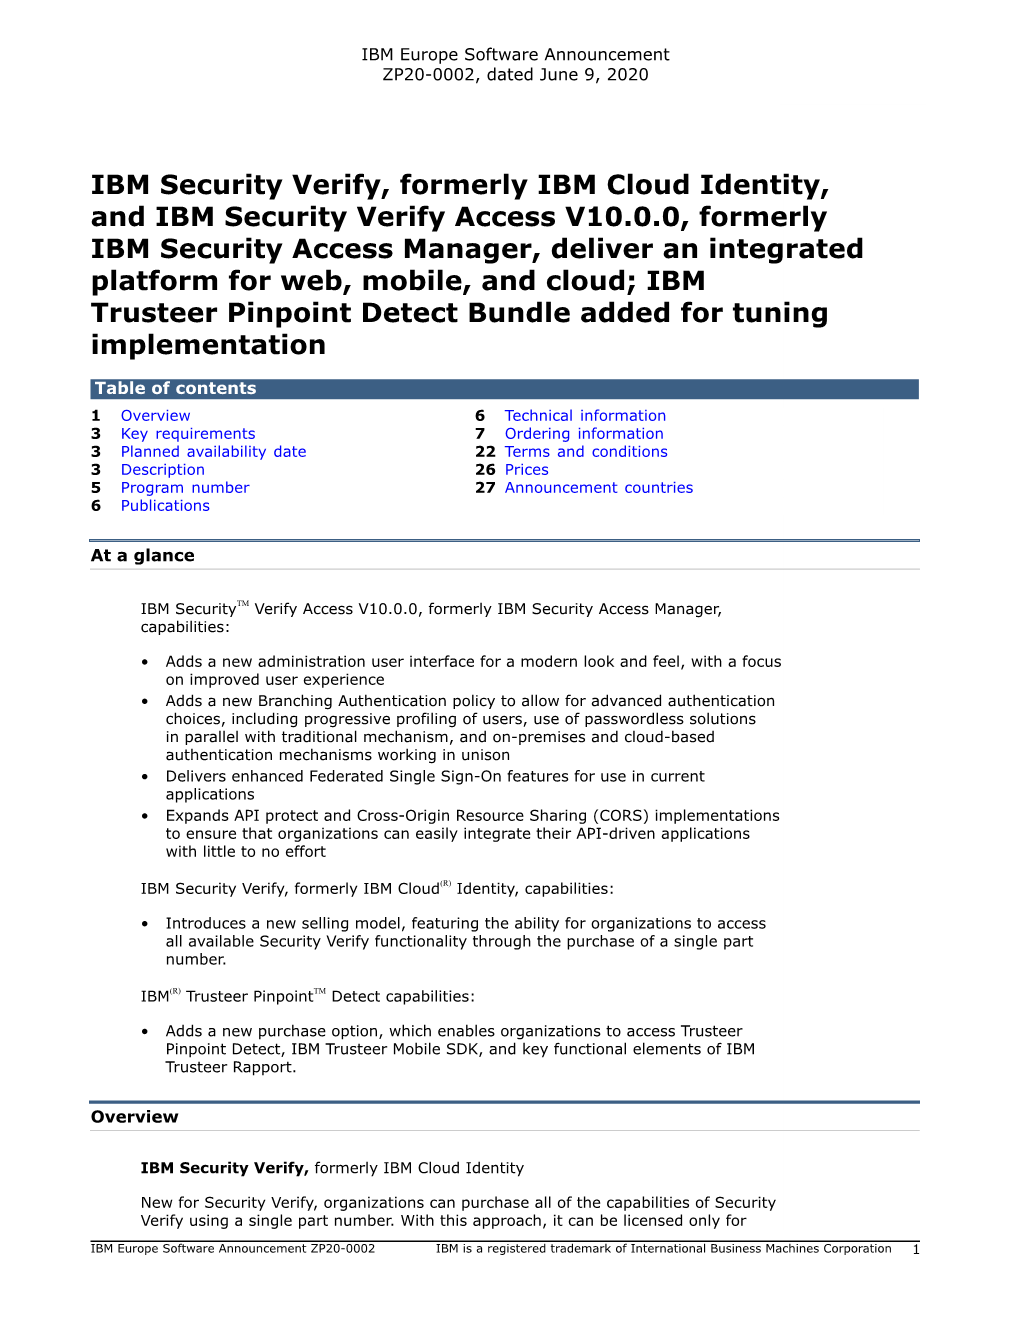 IBM Trusteer Pinpoint Detect Bundle Added for Tuning Implementation